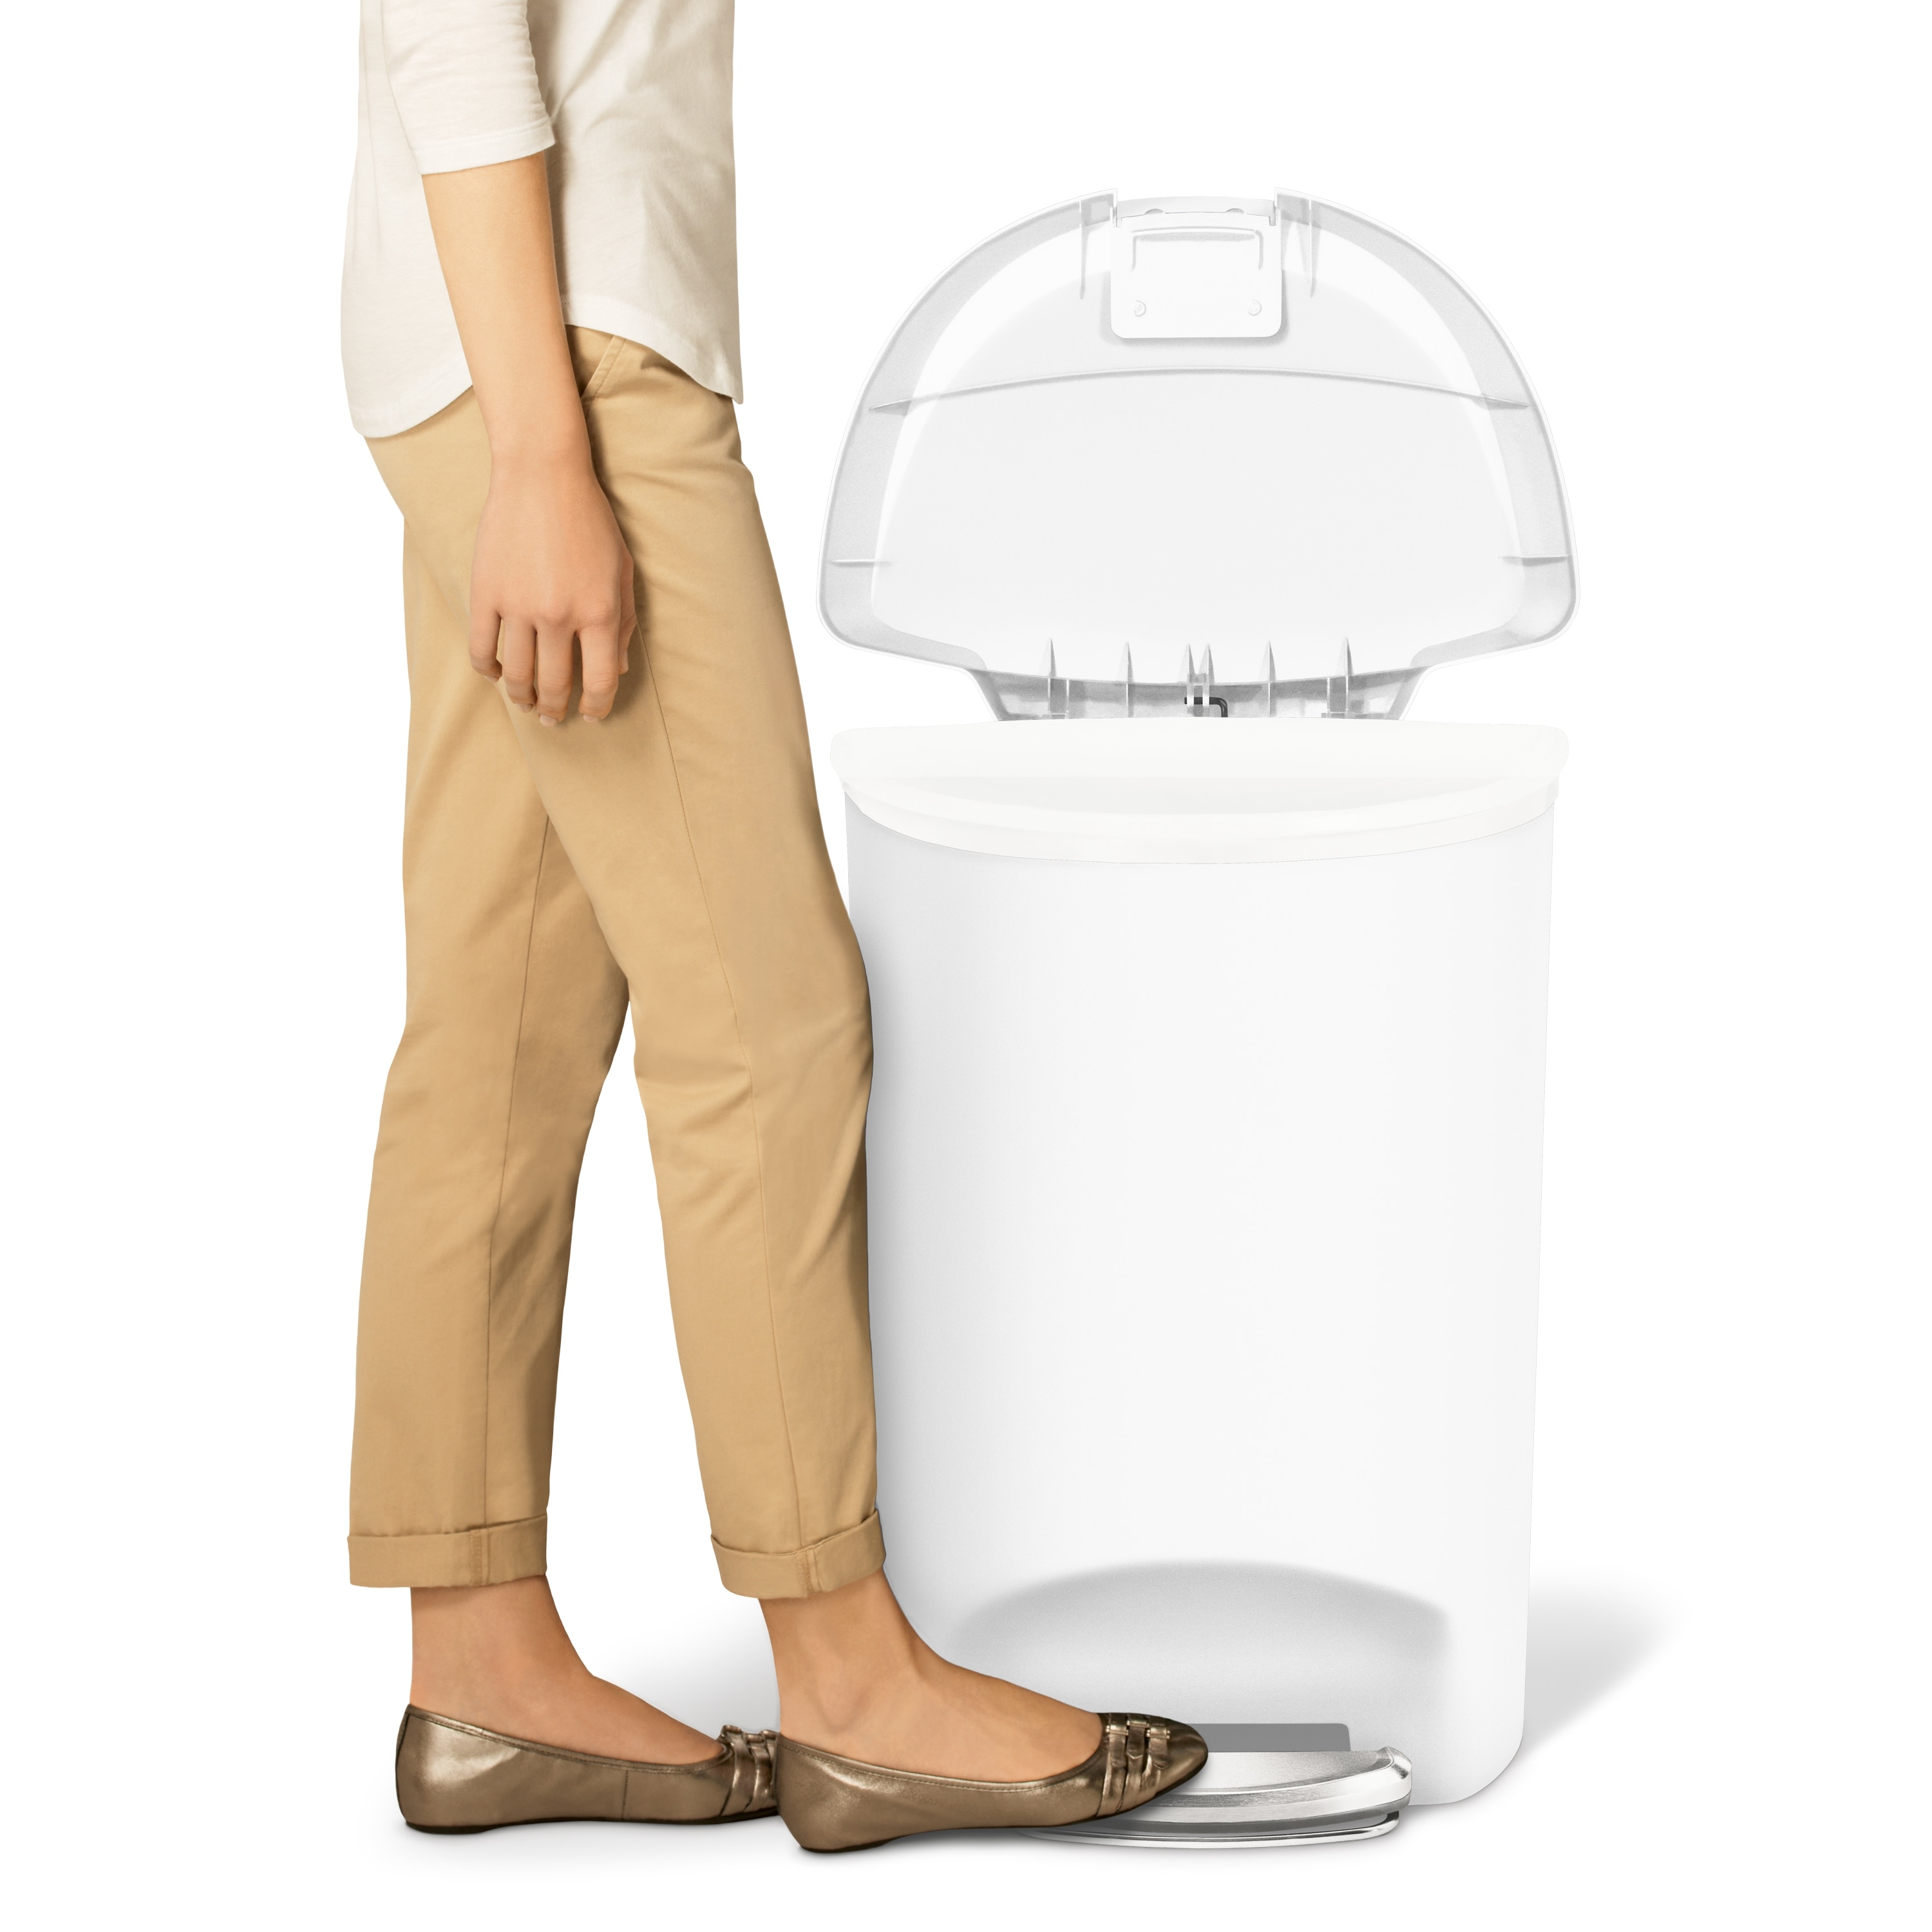 Simple Human Trash Cans for sale in Tulsa, Oklahoma